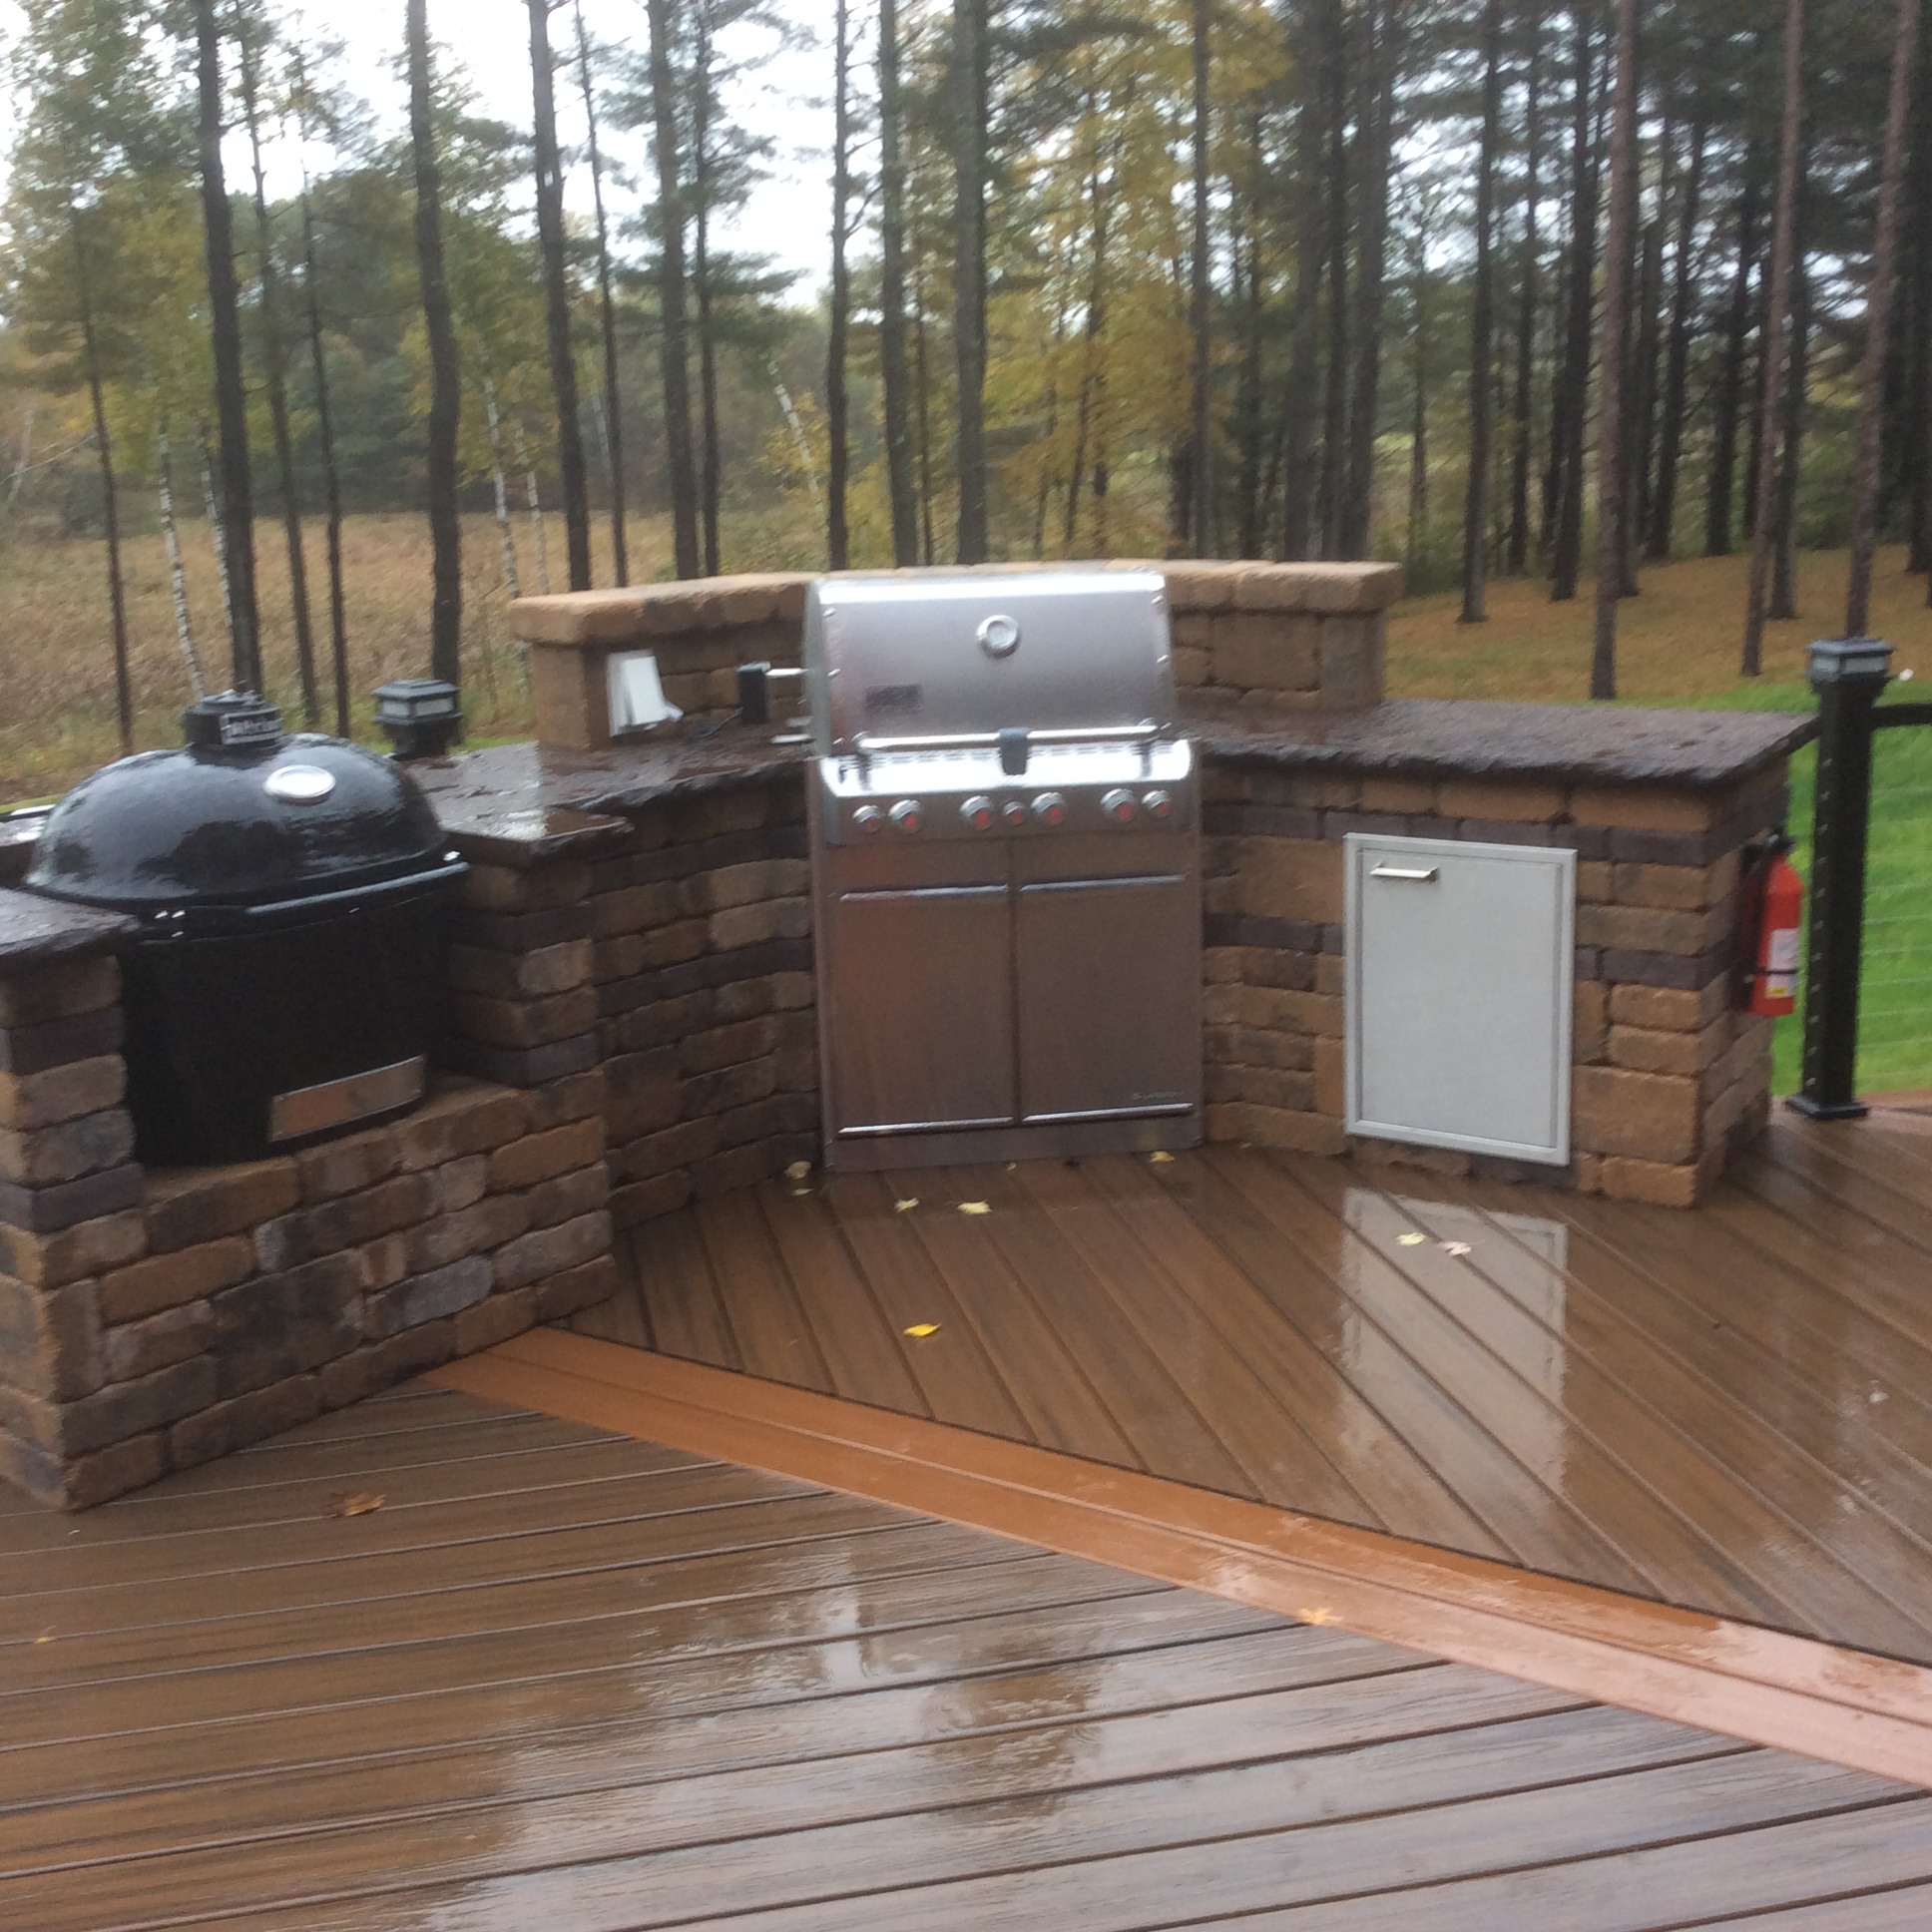 outdoor kitchen with grill and smoker on deck in rain